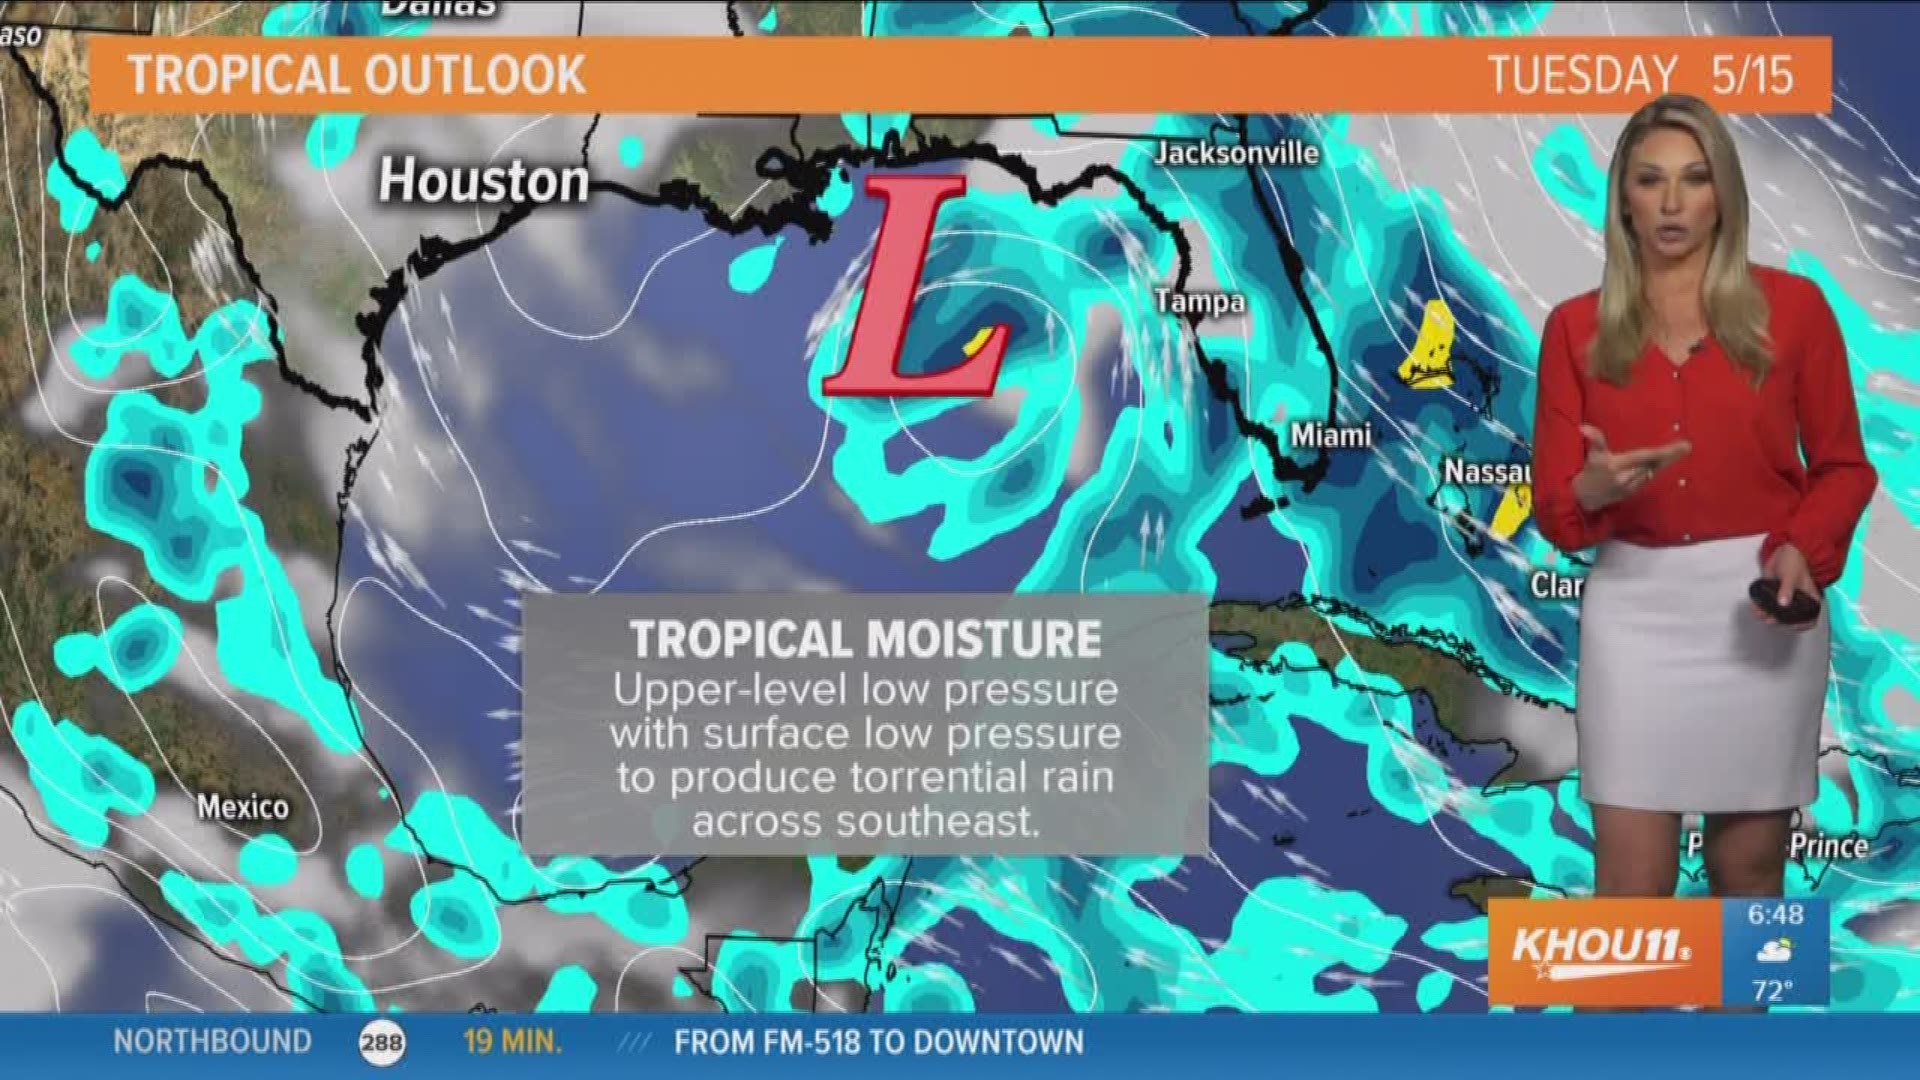 KHOU 11 Meteorologist Chita Craft says the National Hurricane Center is monitoring the possibility of tropical activity in the Gulf. It will likely bring rain to Florida.